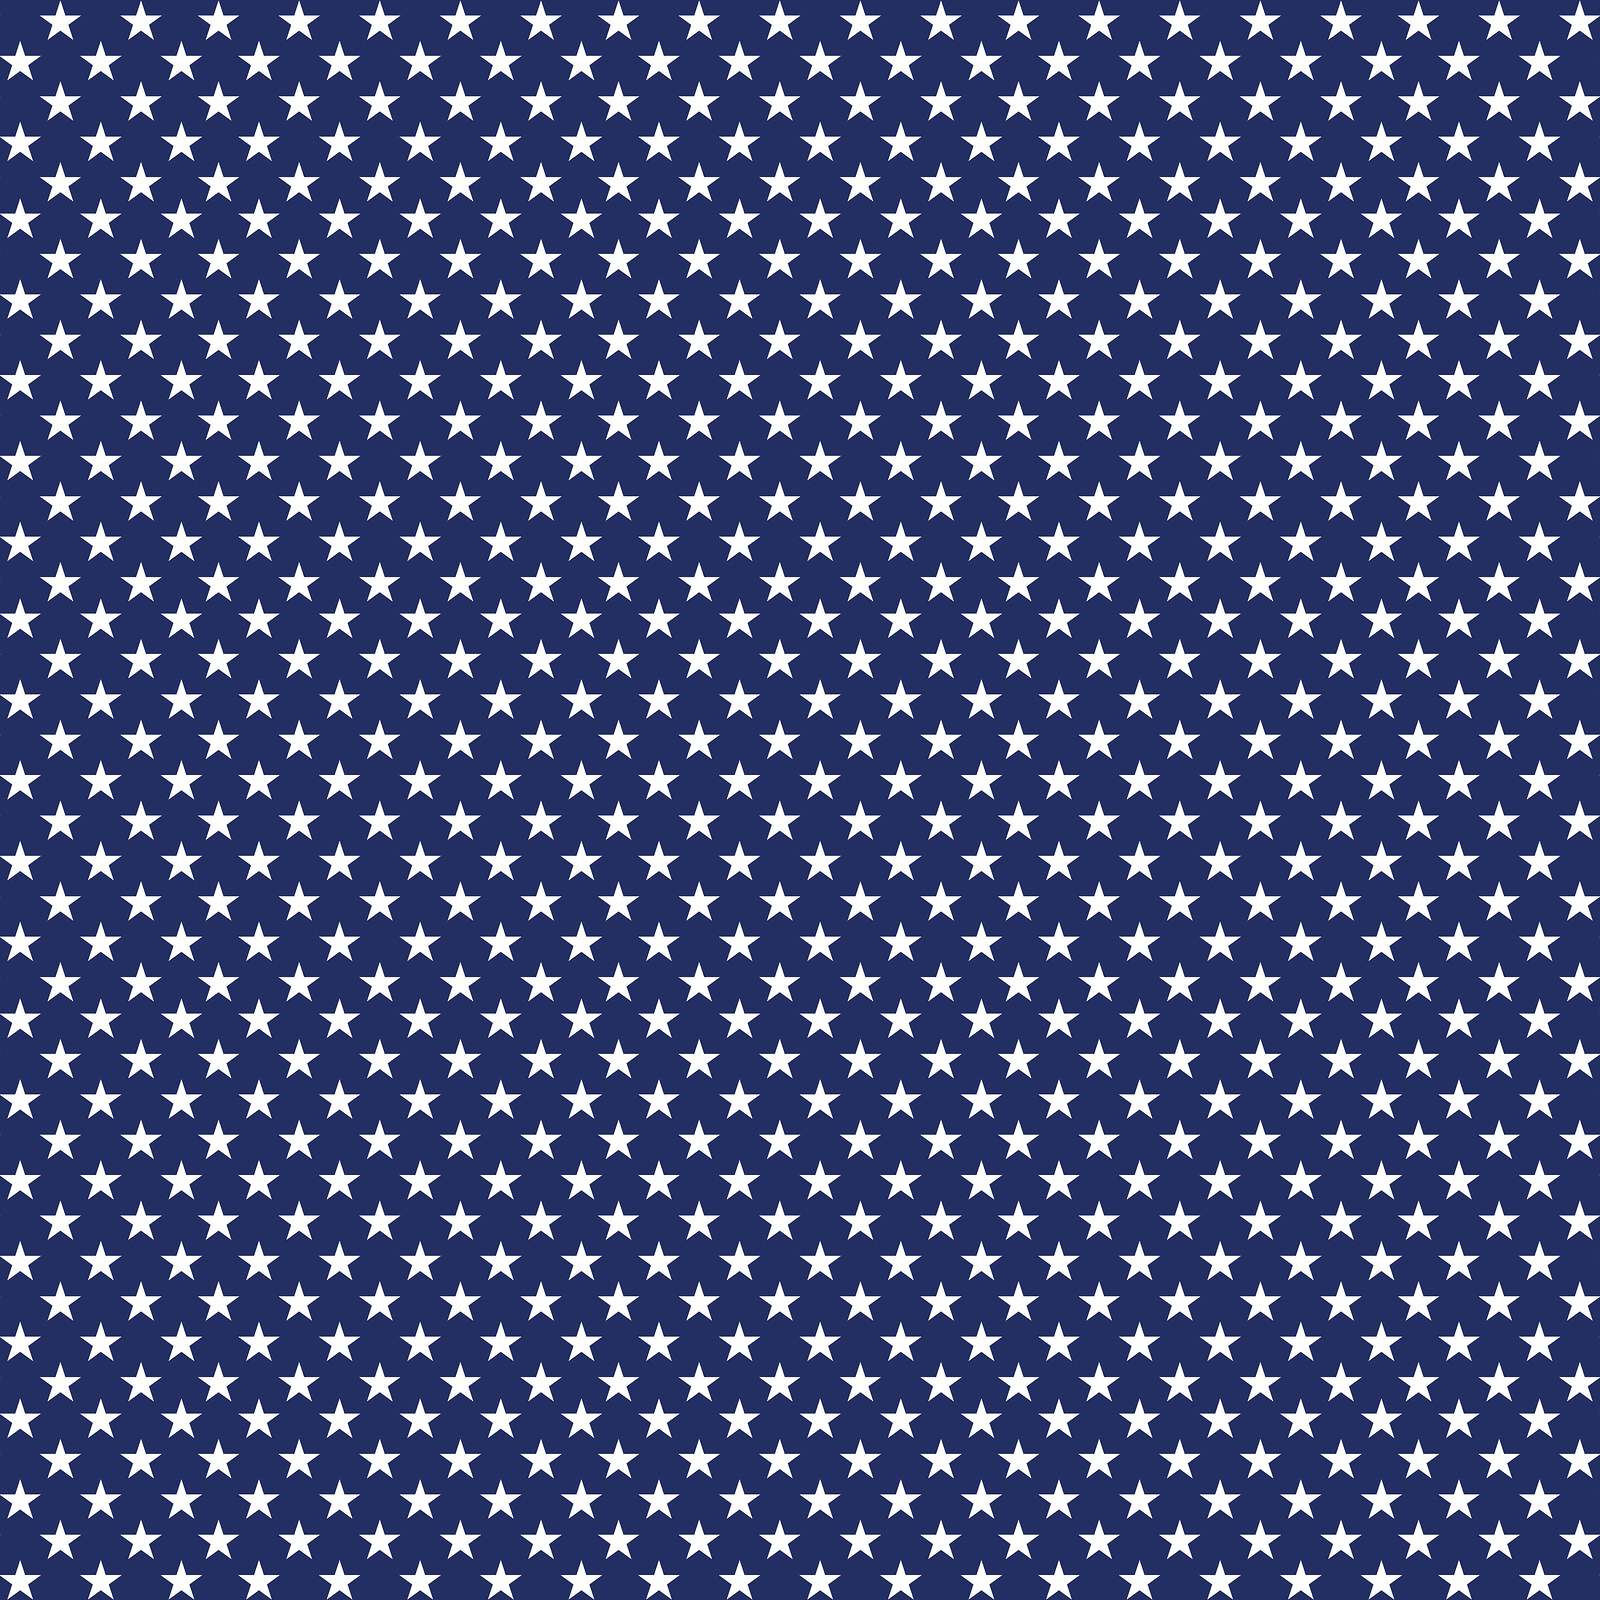 American patriotic seamless pattern white stars on blue background